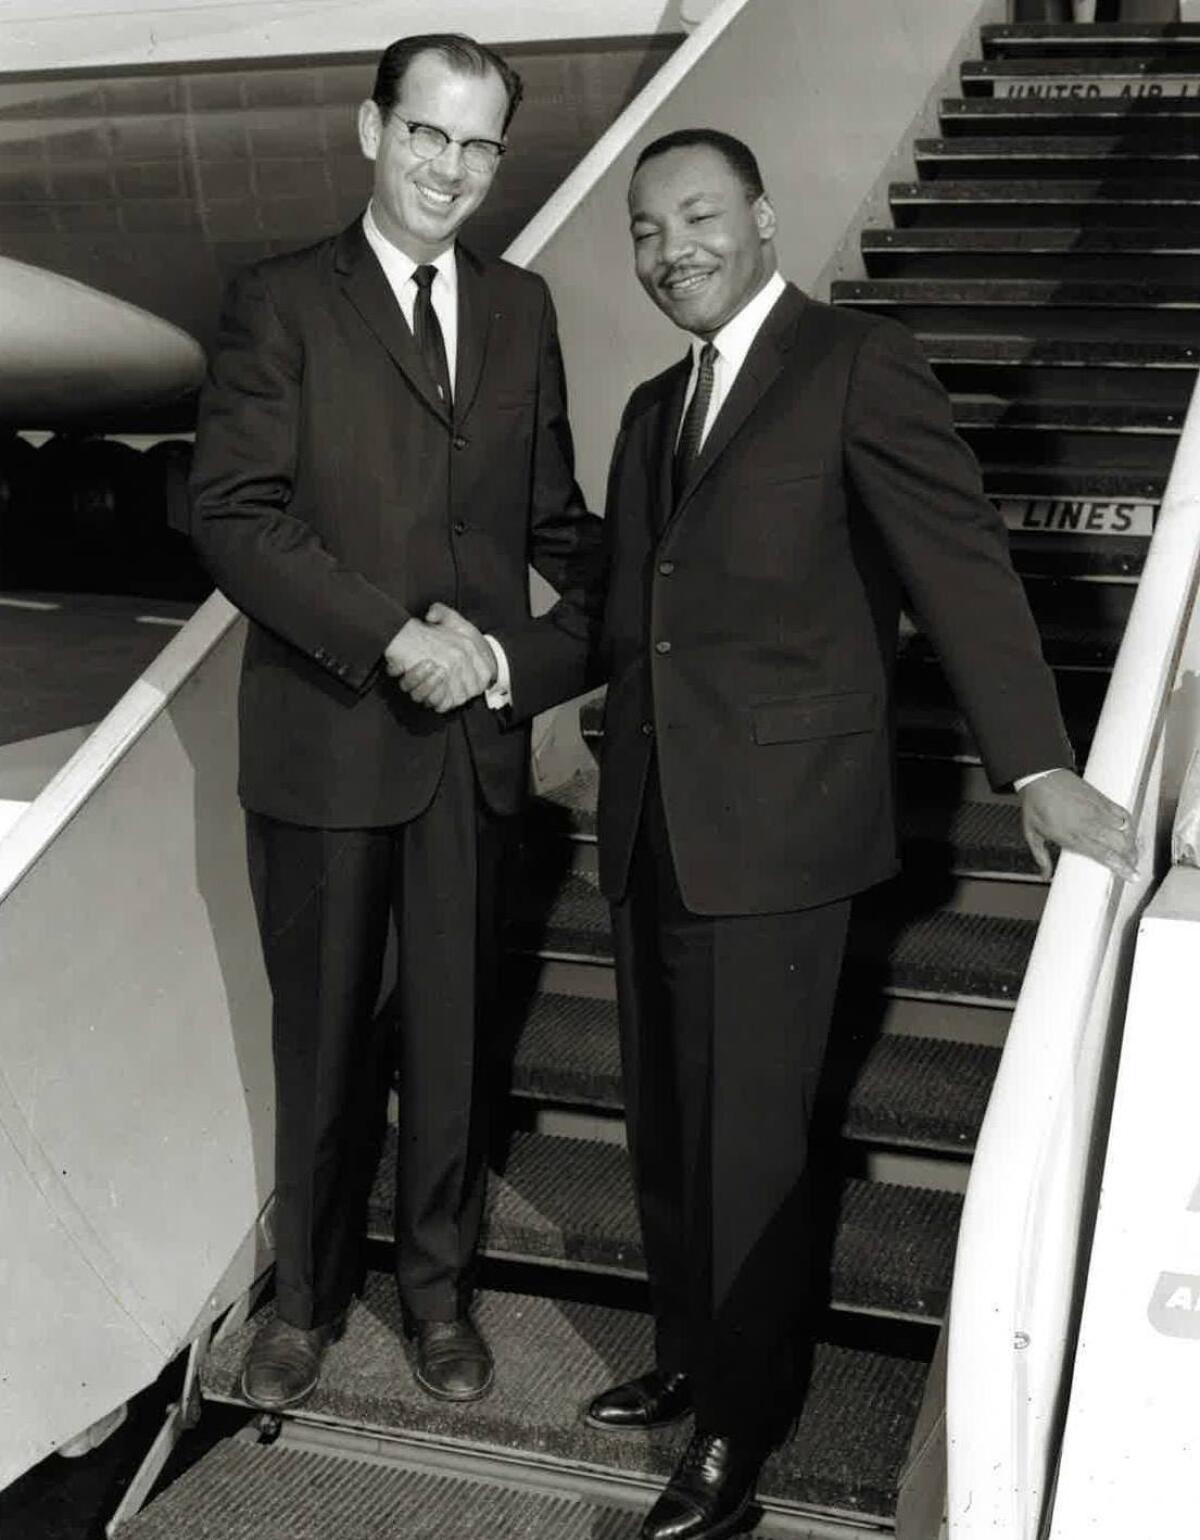 Los Angeles County Supervisor Kenneth Hahn meets Dr. Martin Luther King Jr. on the tarmac of LAX in 1961.